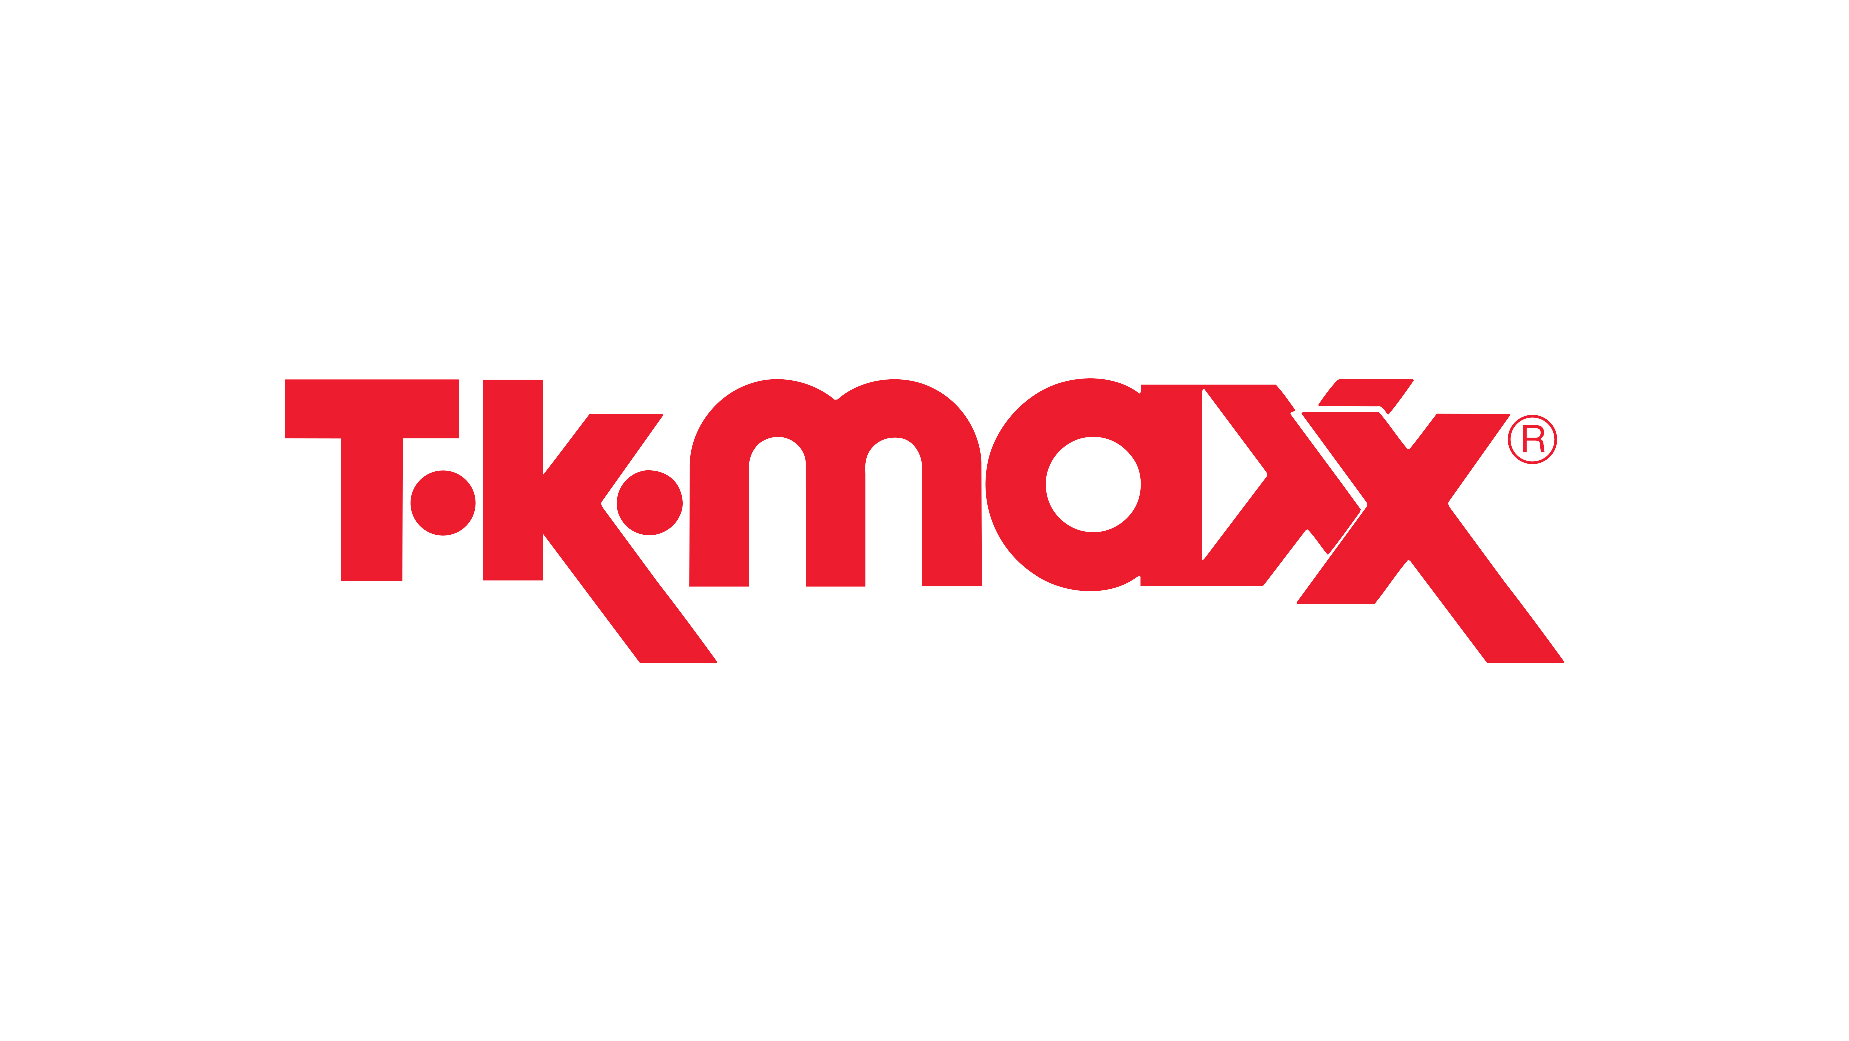 TK Maxx's new flagship store and Superdrug lease renewal at Mount Royal Oxford Street